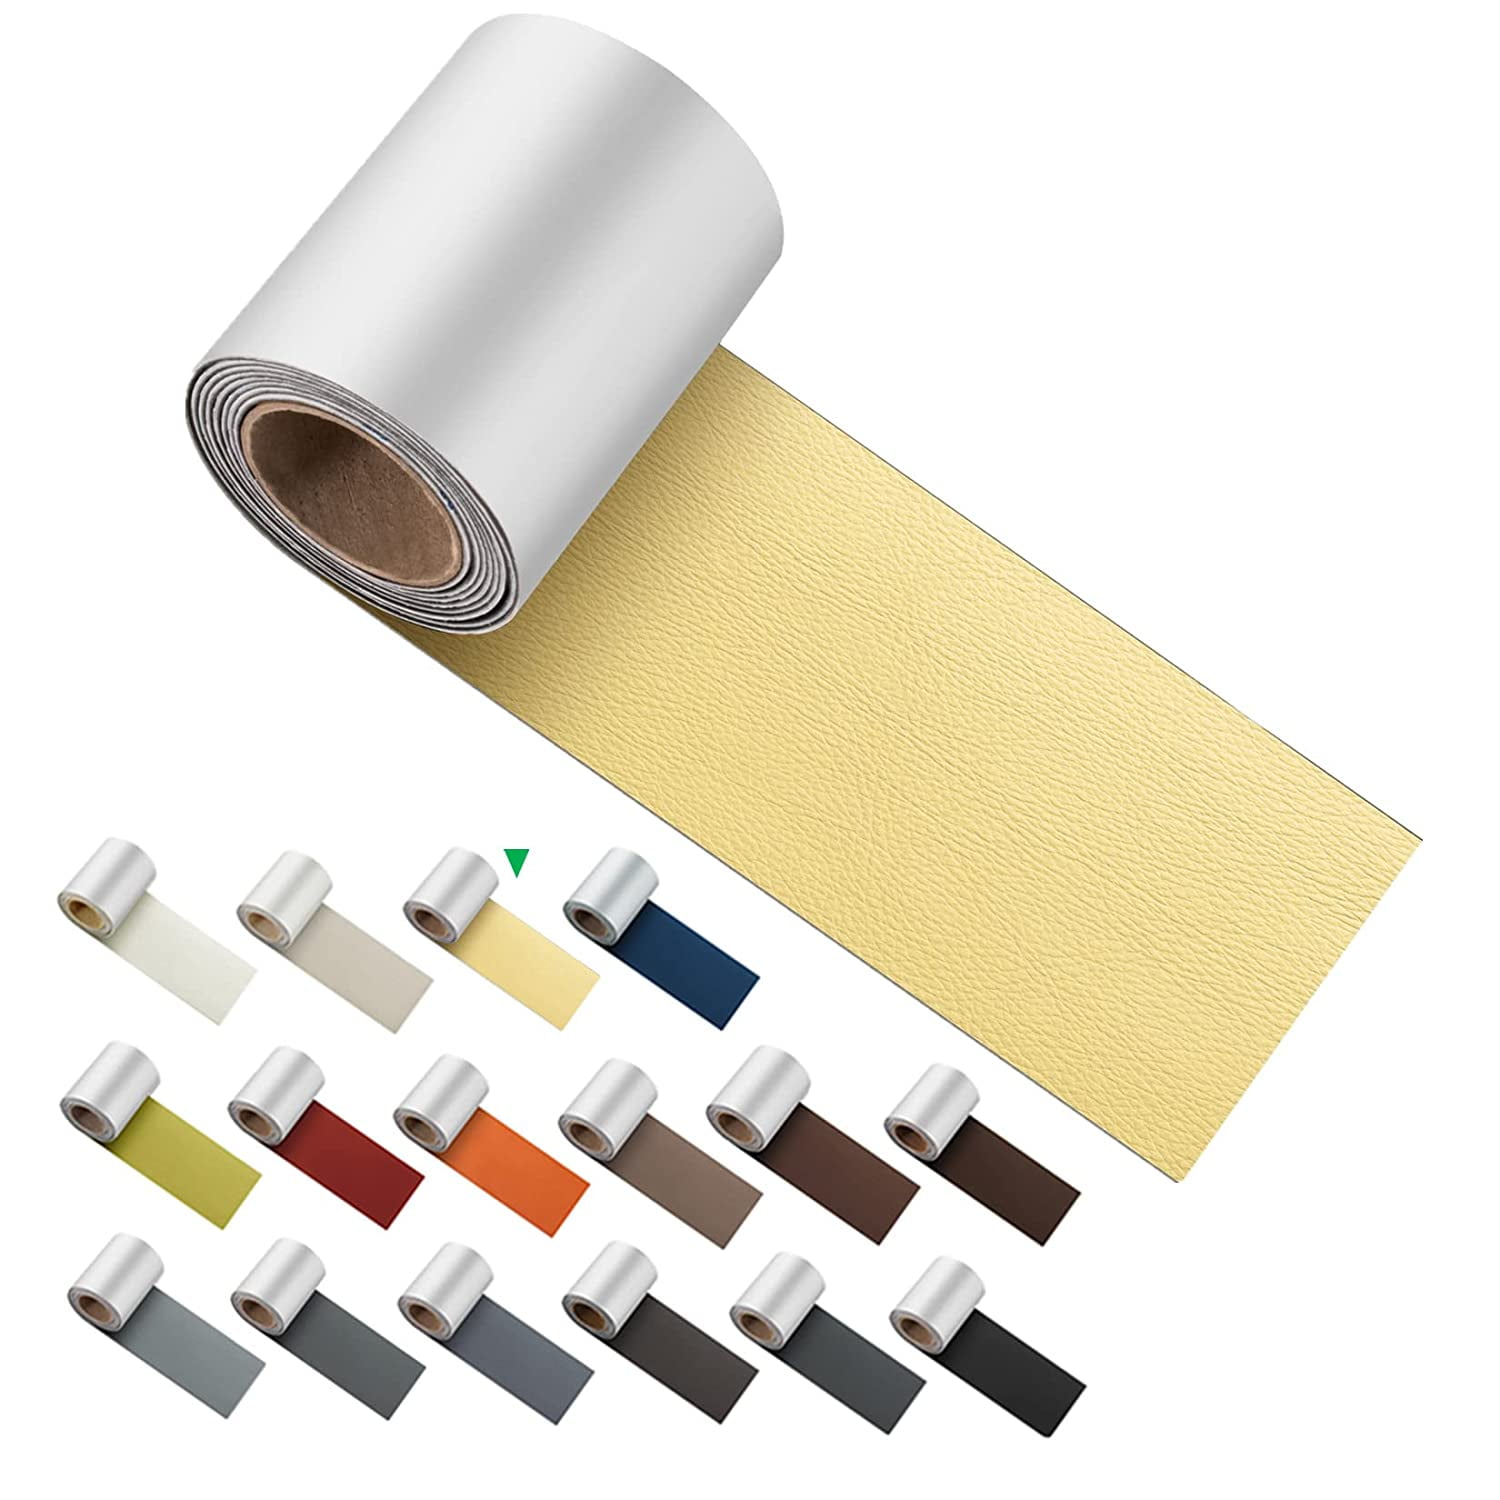 What is Self-adhesive leather repair tape used for-DERFLEX